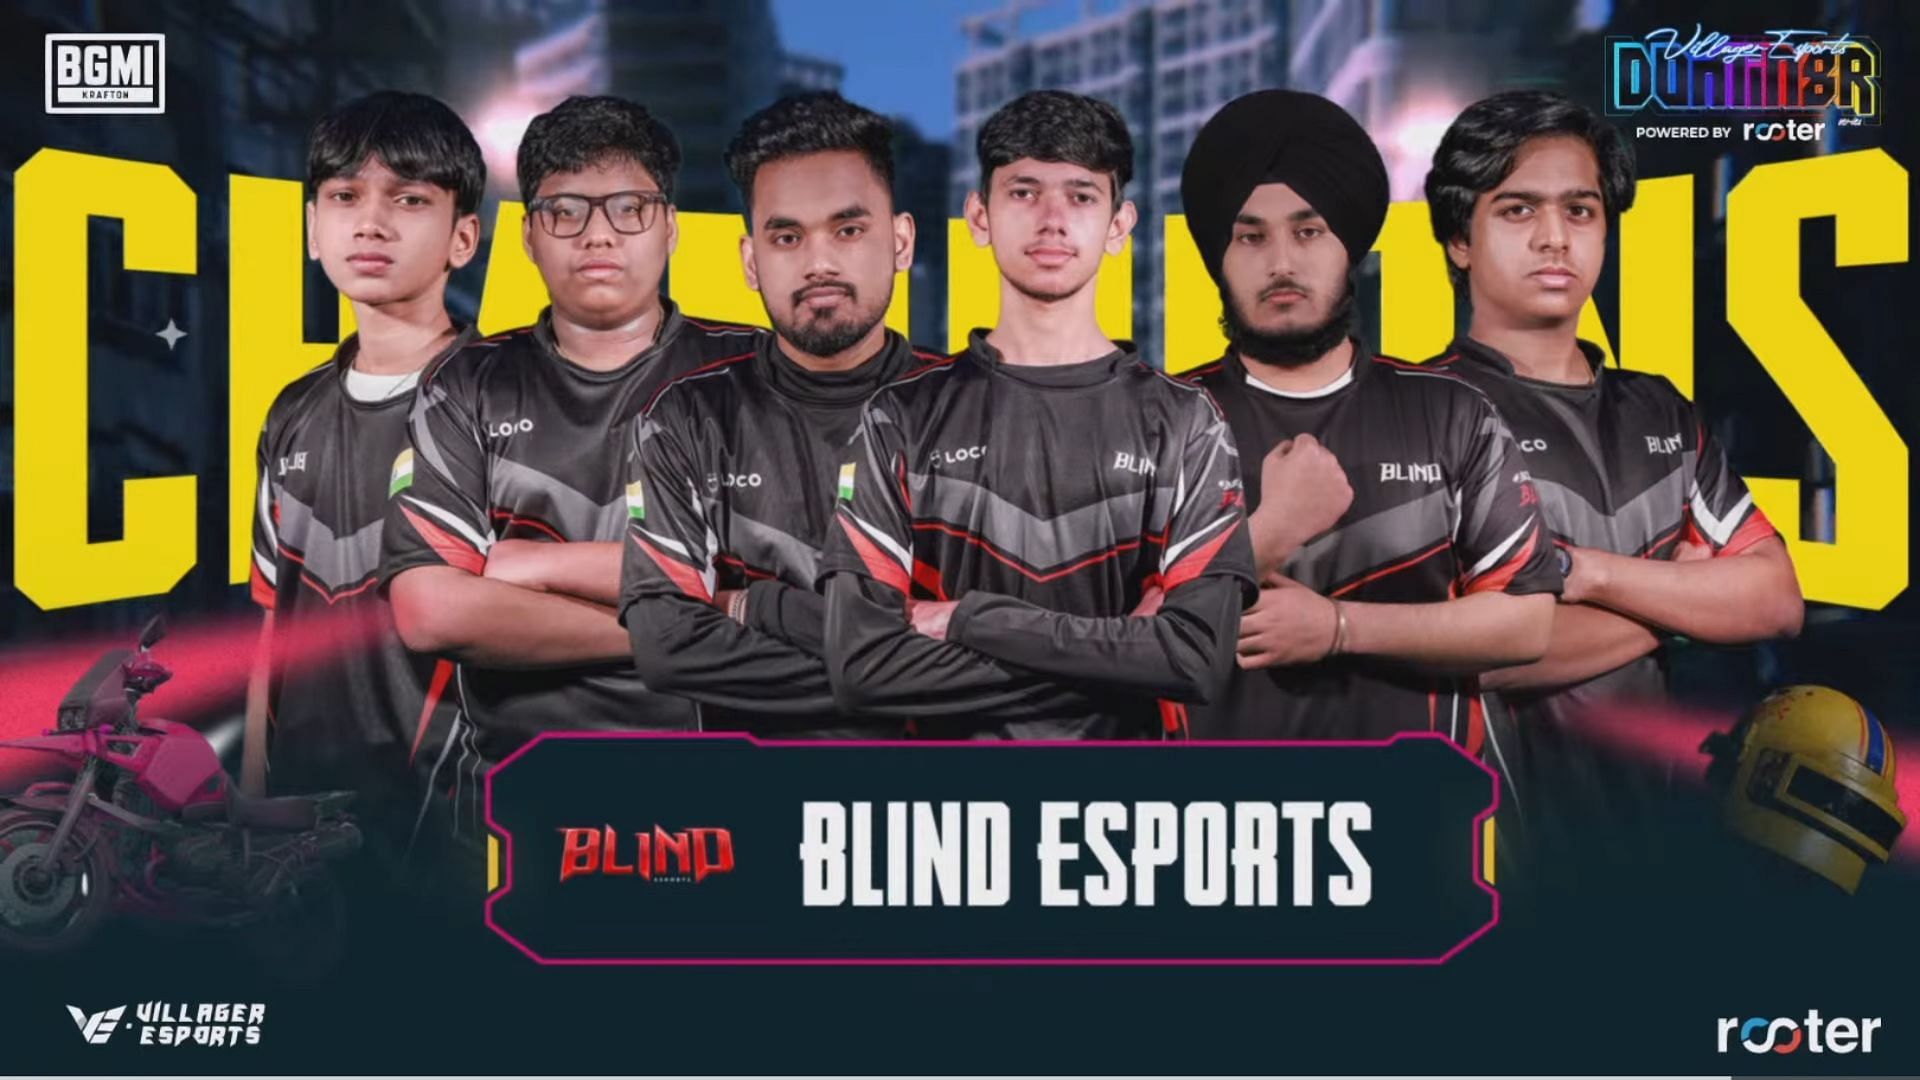 Blind Esports crowned champion of BGMI Domin8r Series (Image via Villager Esports)